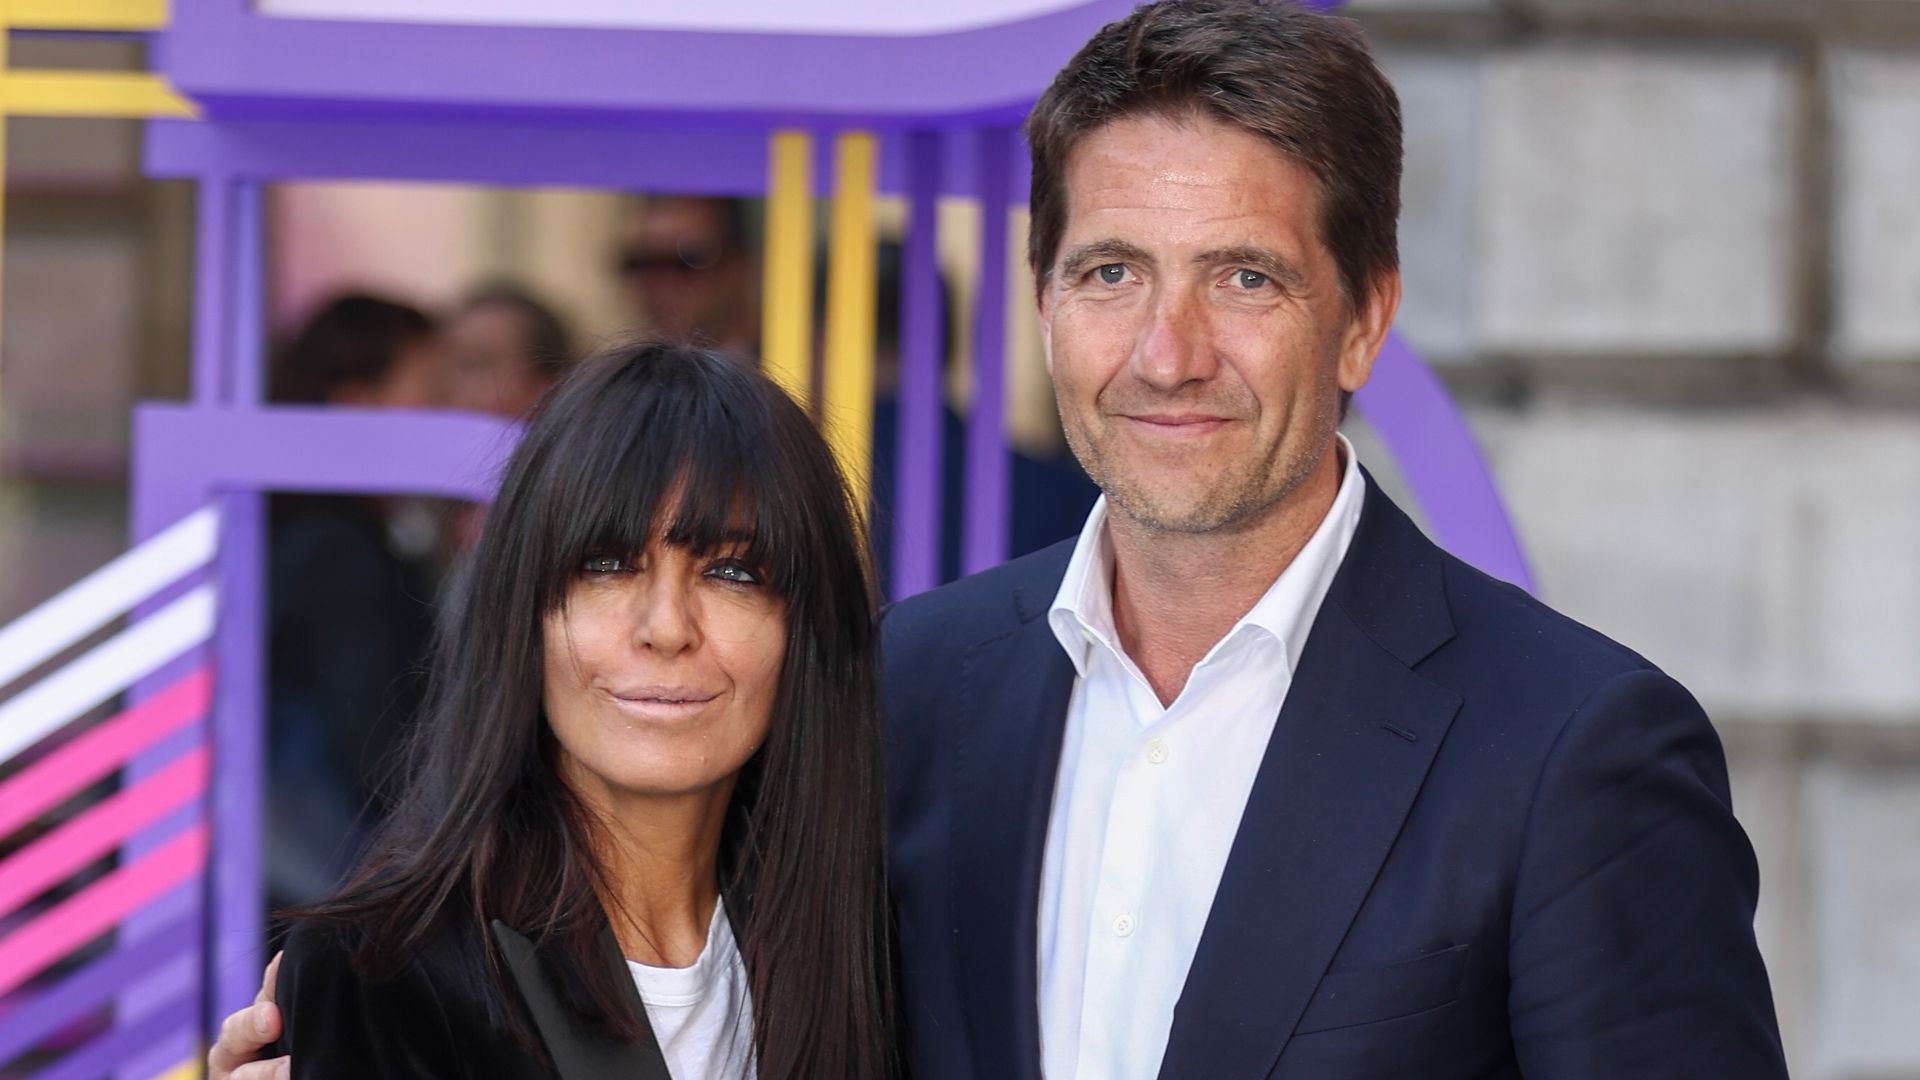 Claudia Winkleman and Kris Thykier attend the 2023 Royal Academy of Arts Summer Preview Party at Royal Academy of Arts on June 06, 2023 in London, England.